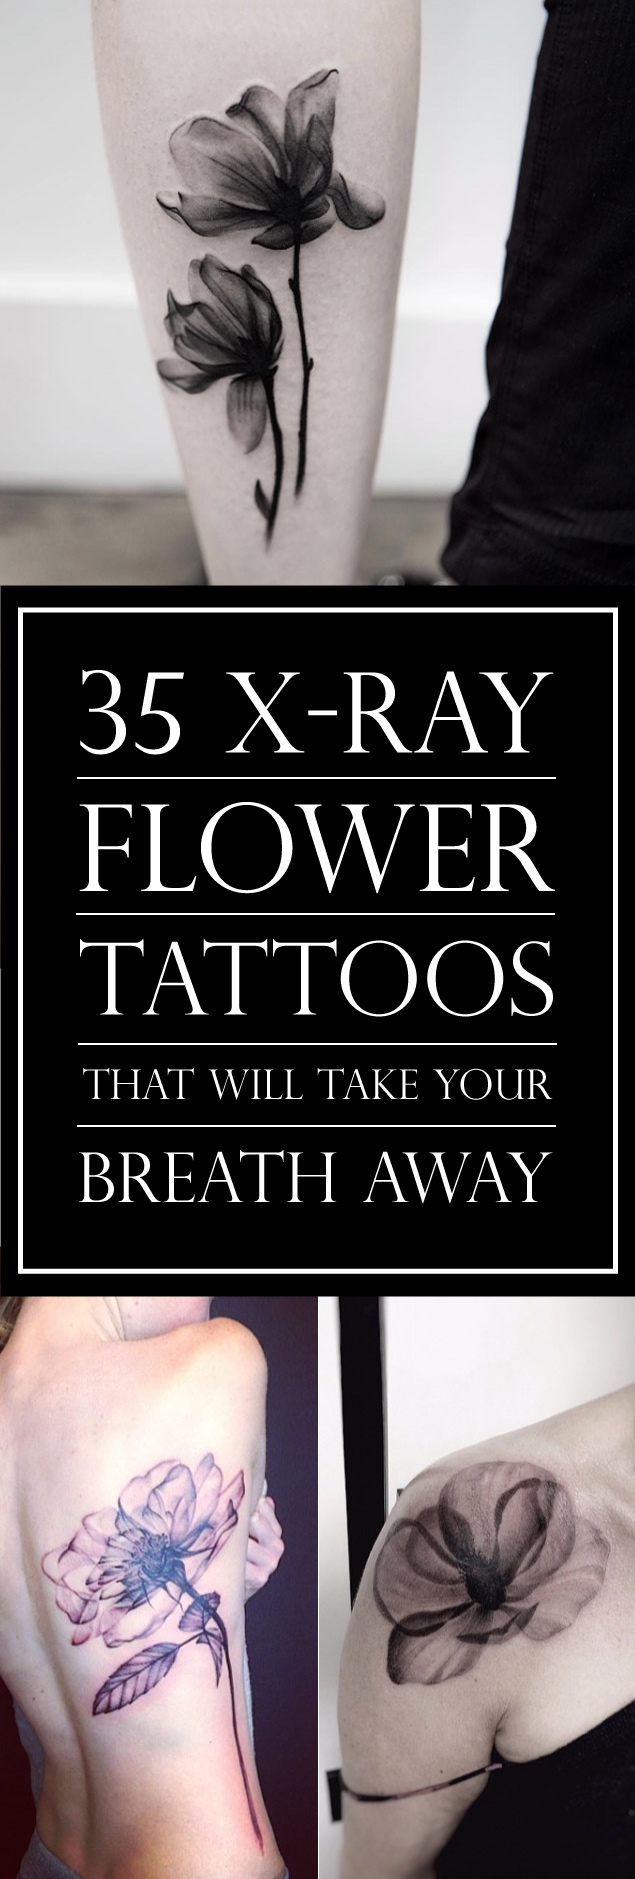 Amazing X-Ray Floral Tattoos!